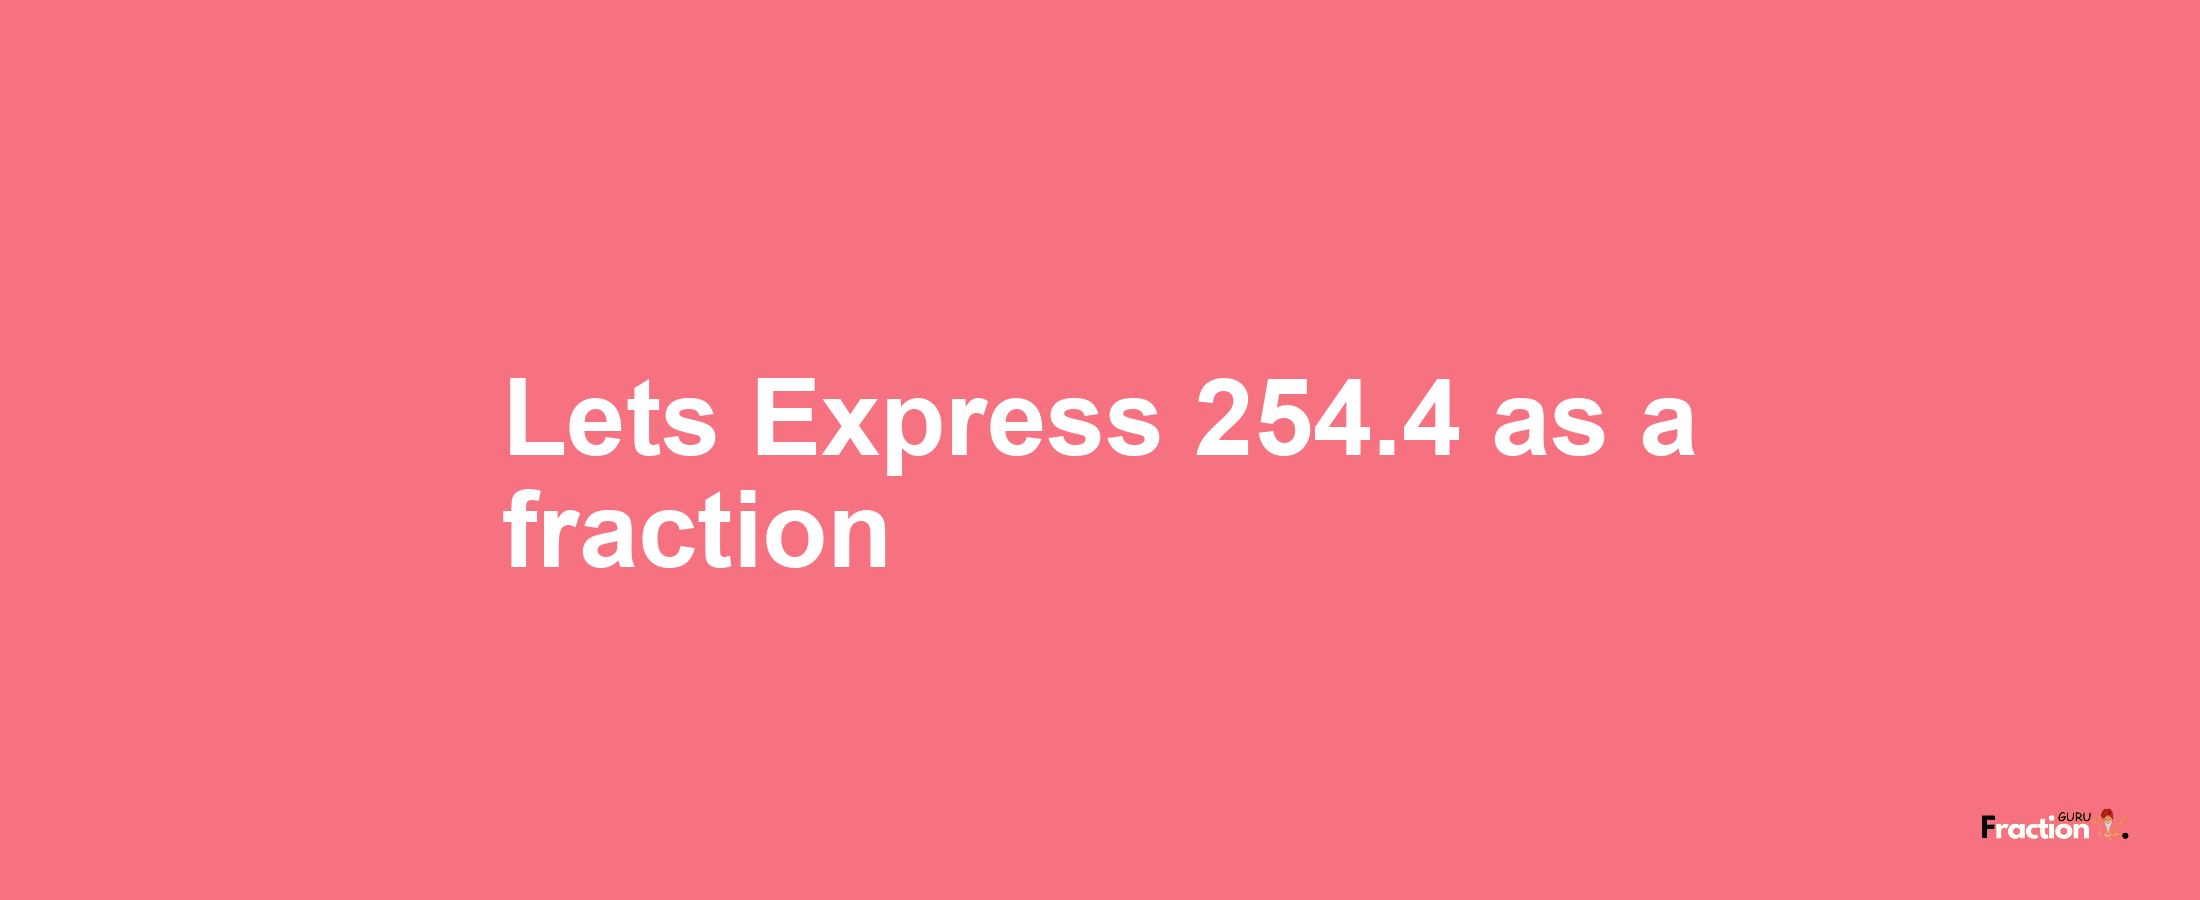 Lets Express 254.4 as afraction